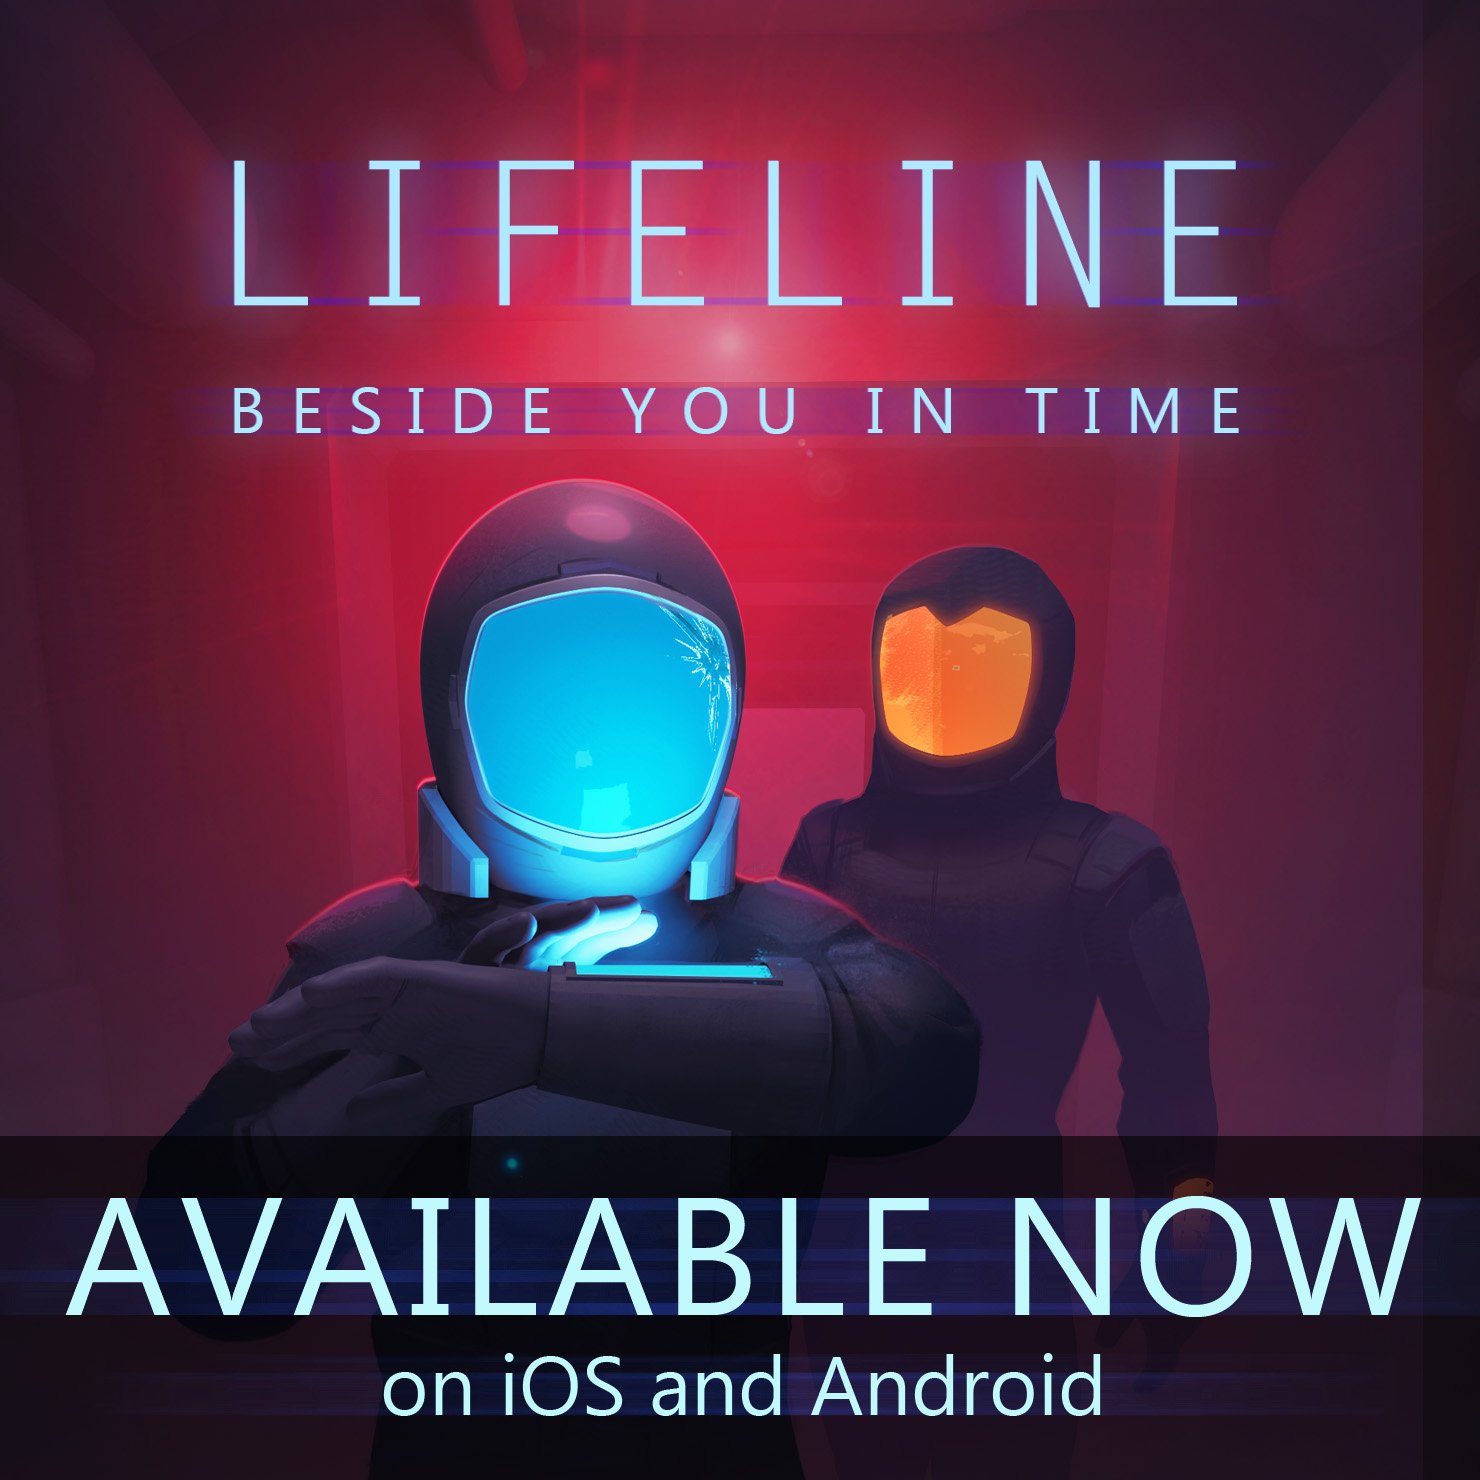 ‘Lifeline: Beside You in Time’ Is the First New ‘Lifeline’ Texting Adventure Game in 6 Years Out Now on iOS and Android